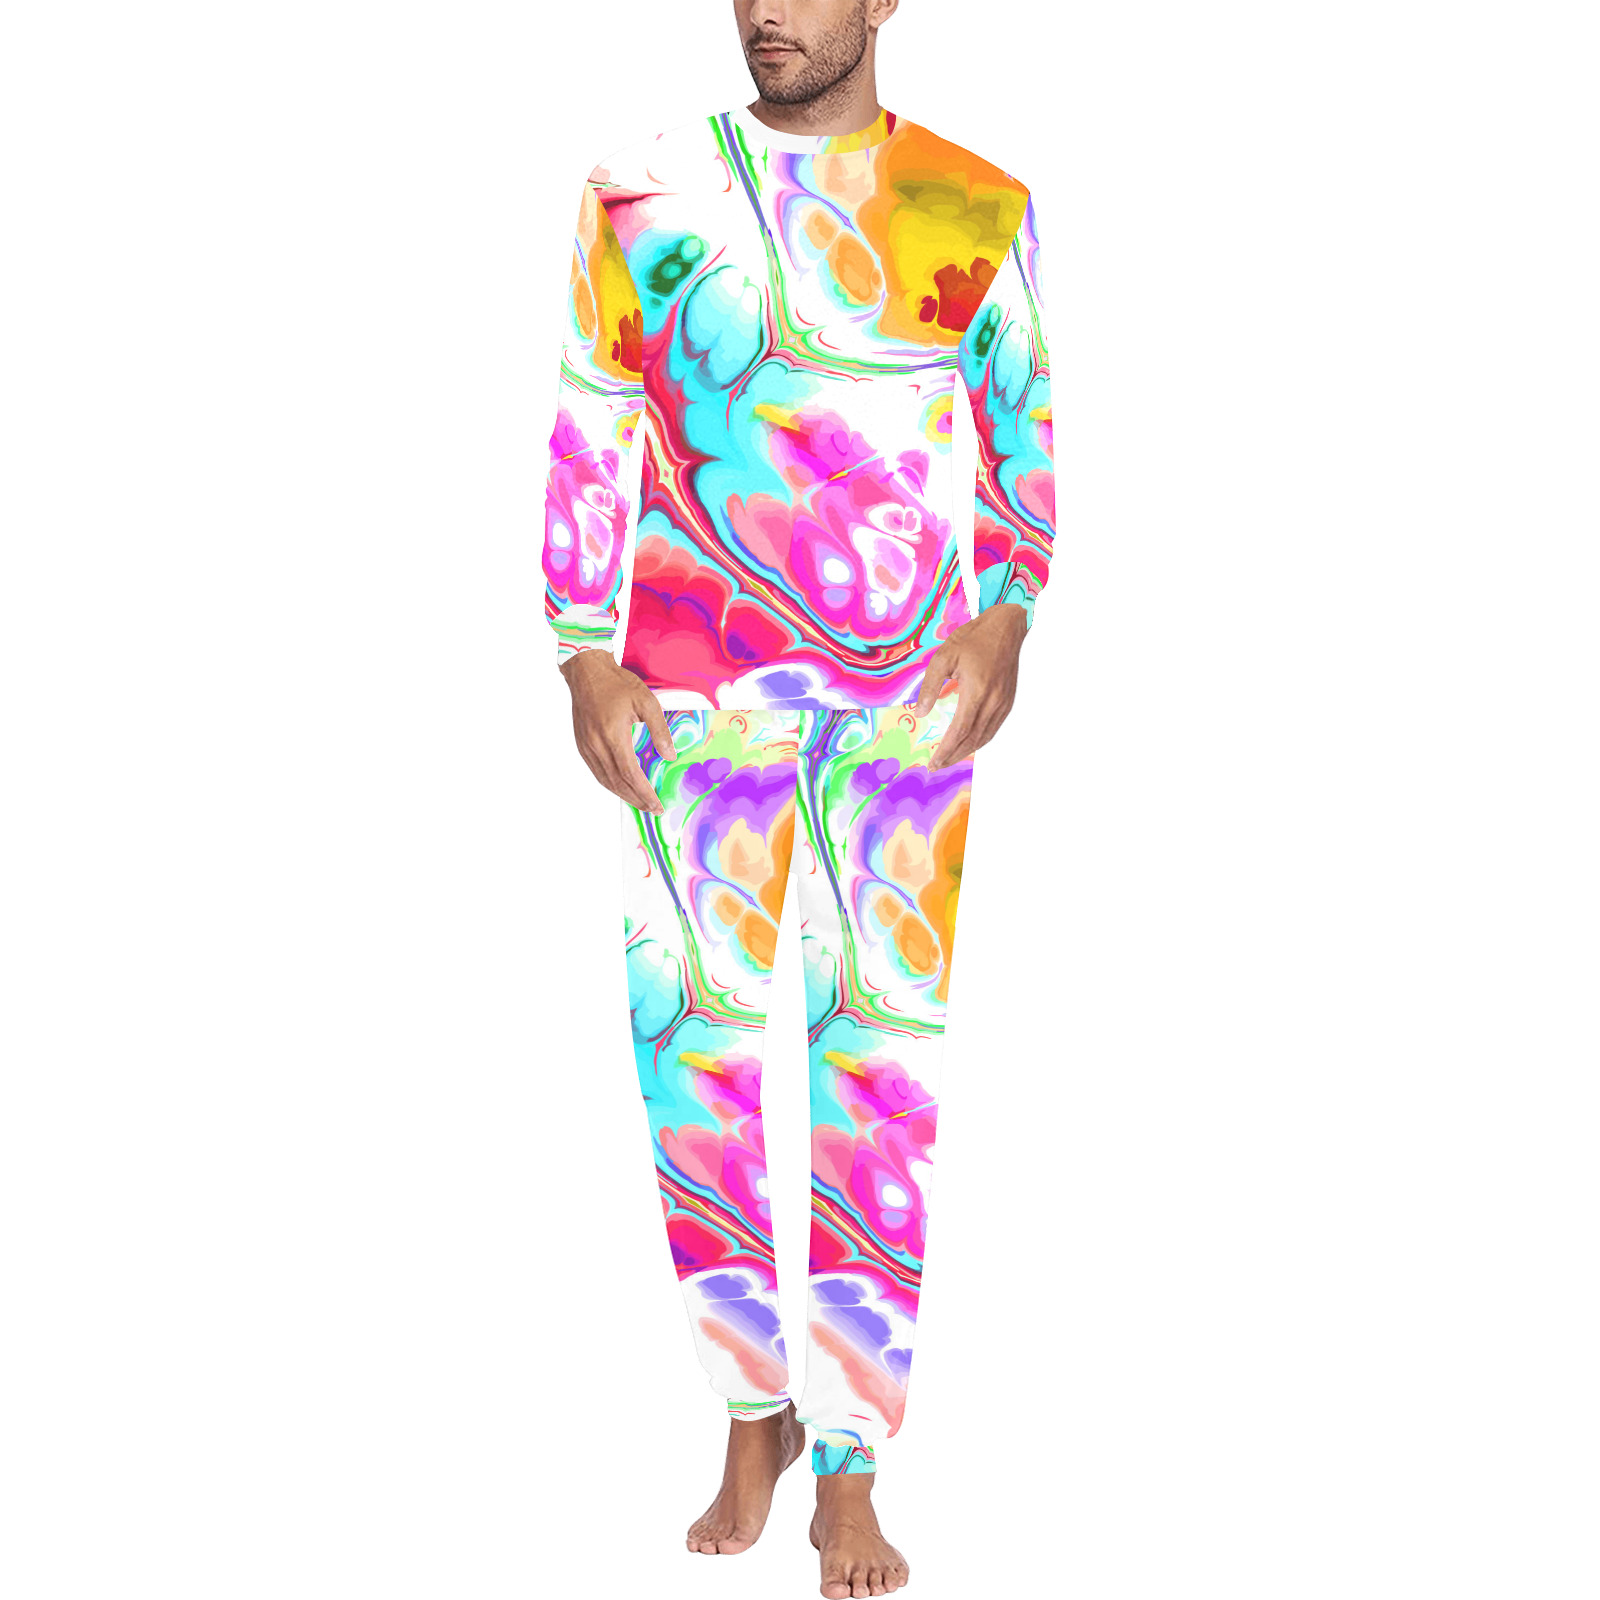 Funky Marble Acrylic Cellular Flowing Liquid Art Men's All Over Print Pajama Set with Custom Cuff